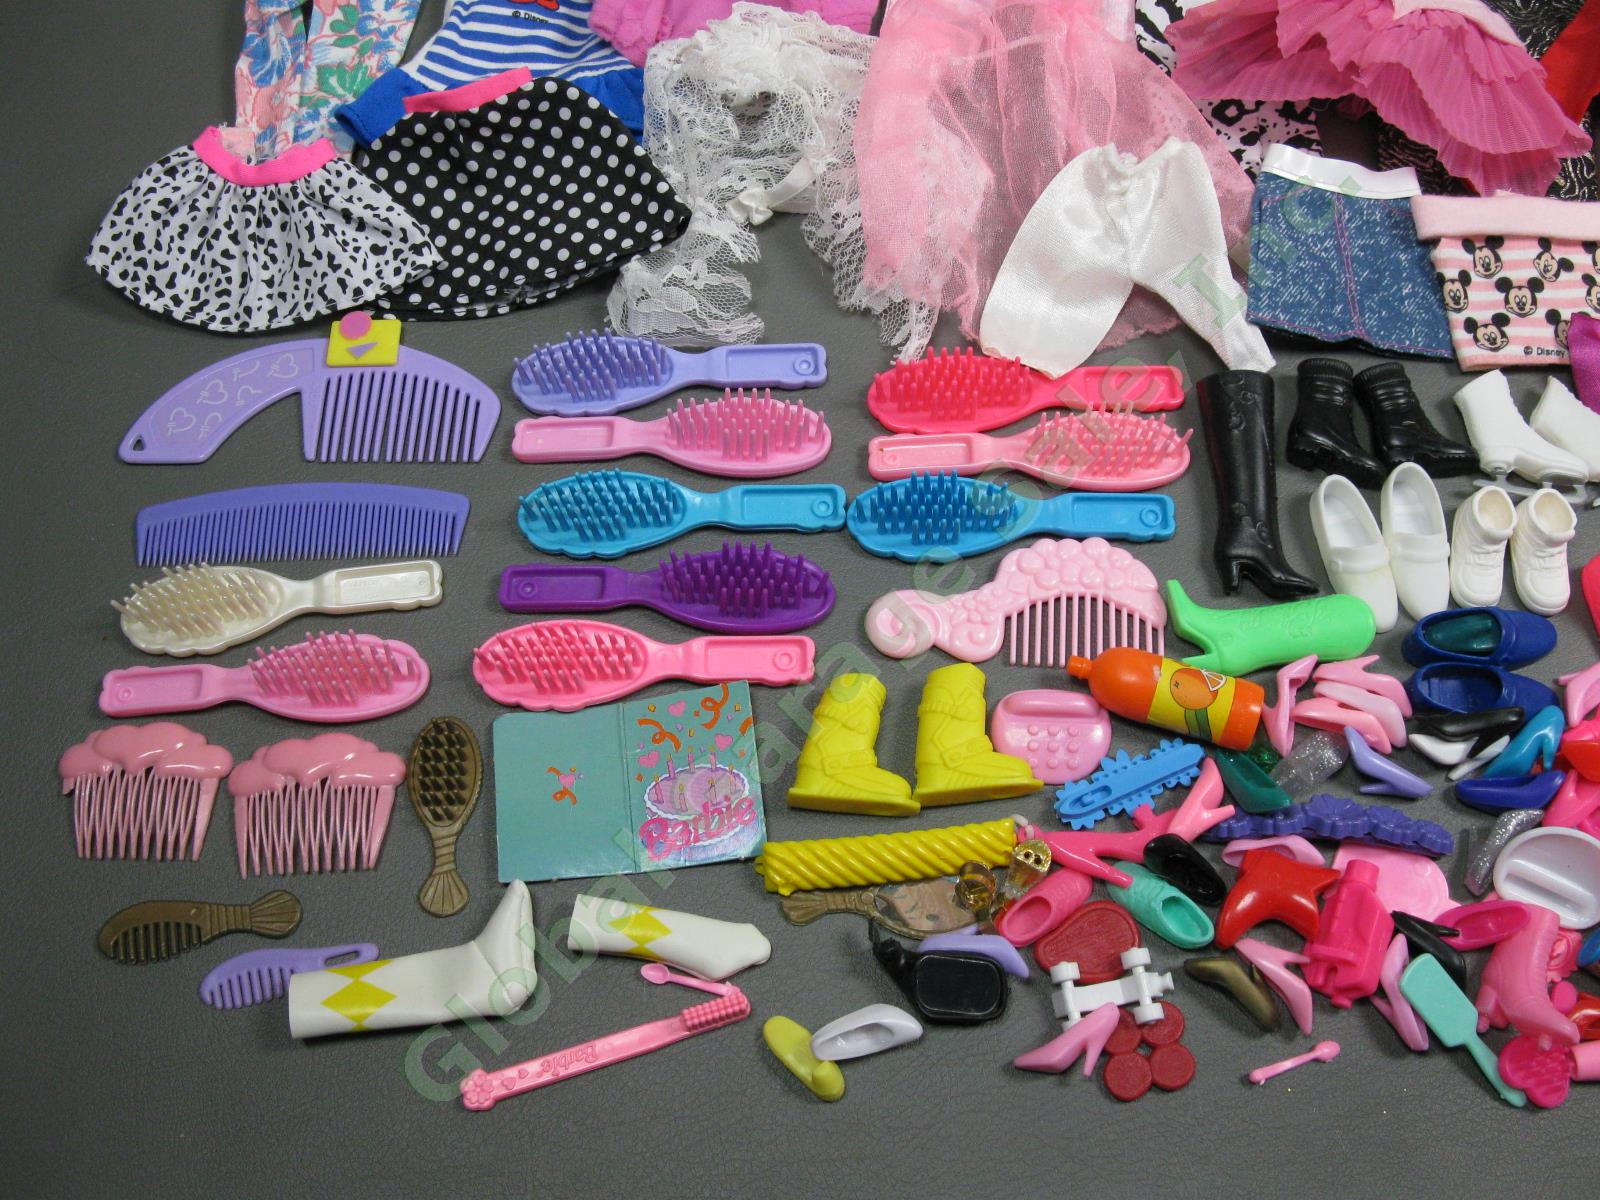 HUGE 29 1970s-1990s Barbie Doll Lot Horse Clothes Accessories Disney Collection 44